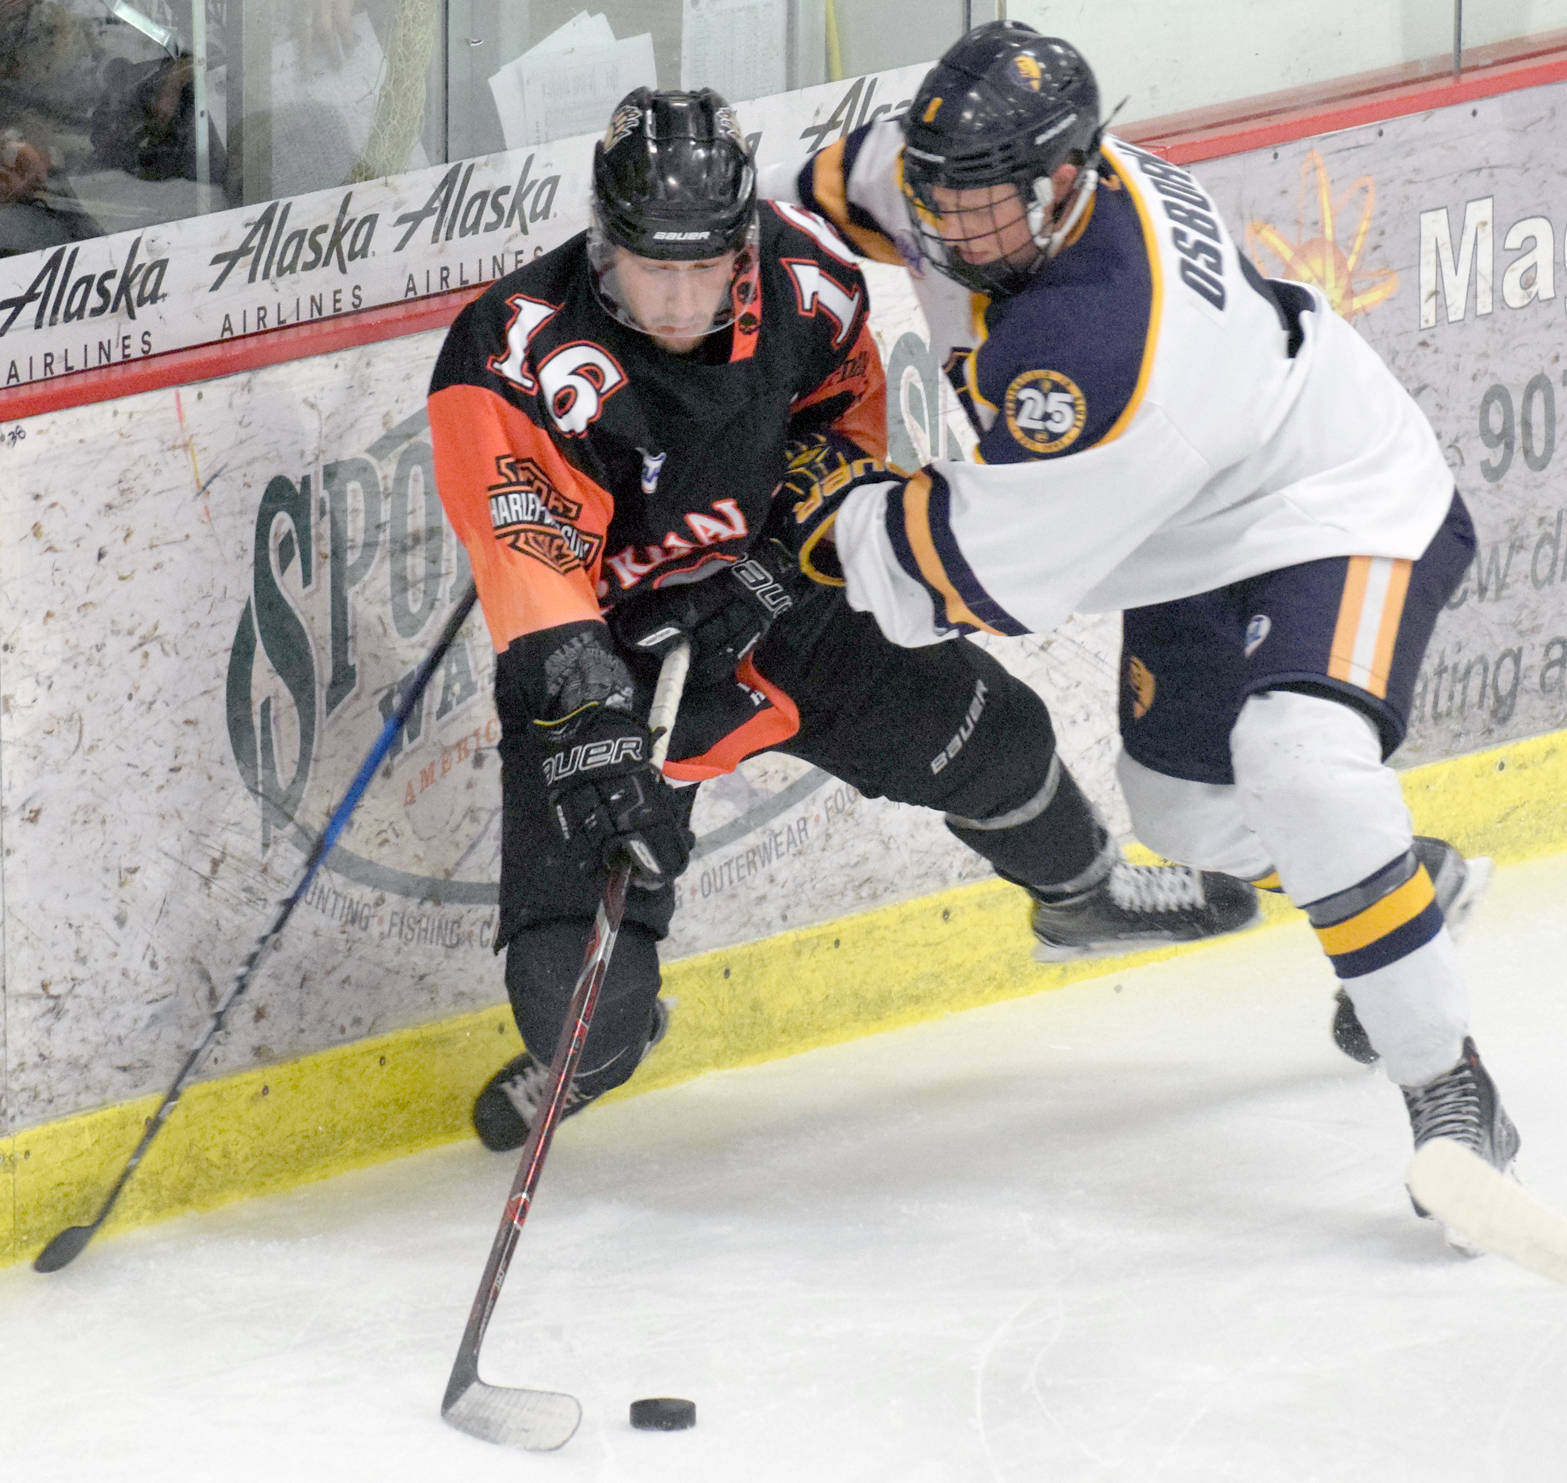 Kenai River Brown Bears forward David Kaplan shovels a pass out in front of the net against Springfield (Illinois) Jr. Blues defenseman Max Osborne on Friday at the Soldotna Regional Sports Complex. (Photo by Jeff Helminiak/Peninsula Clarion)